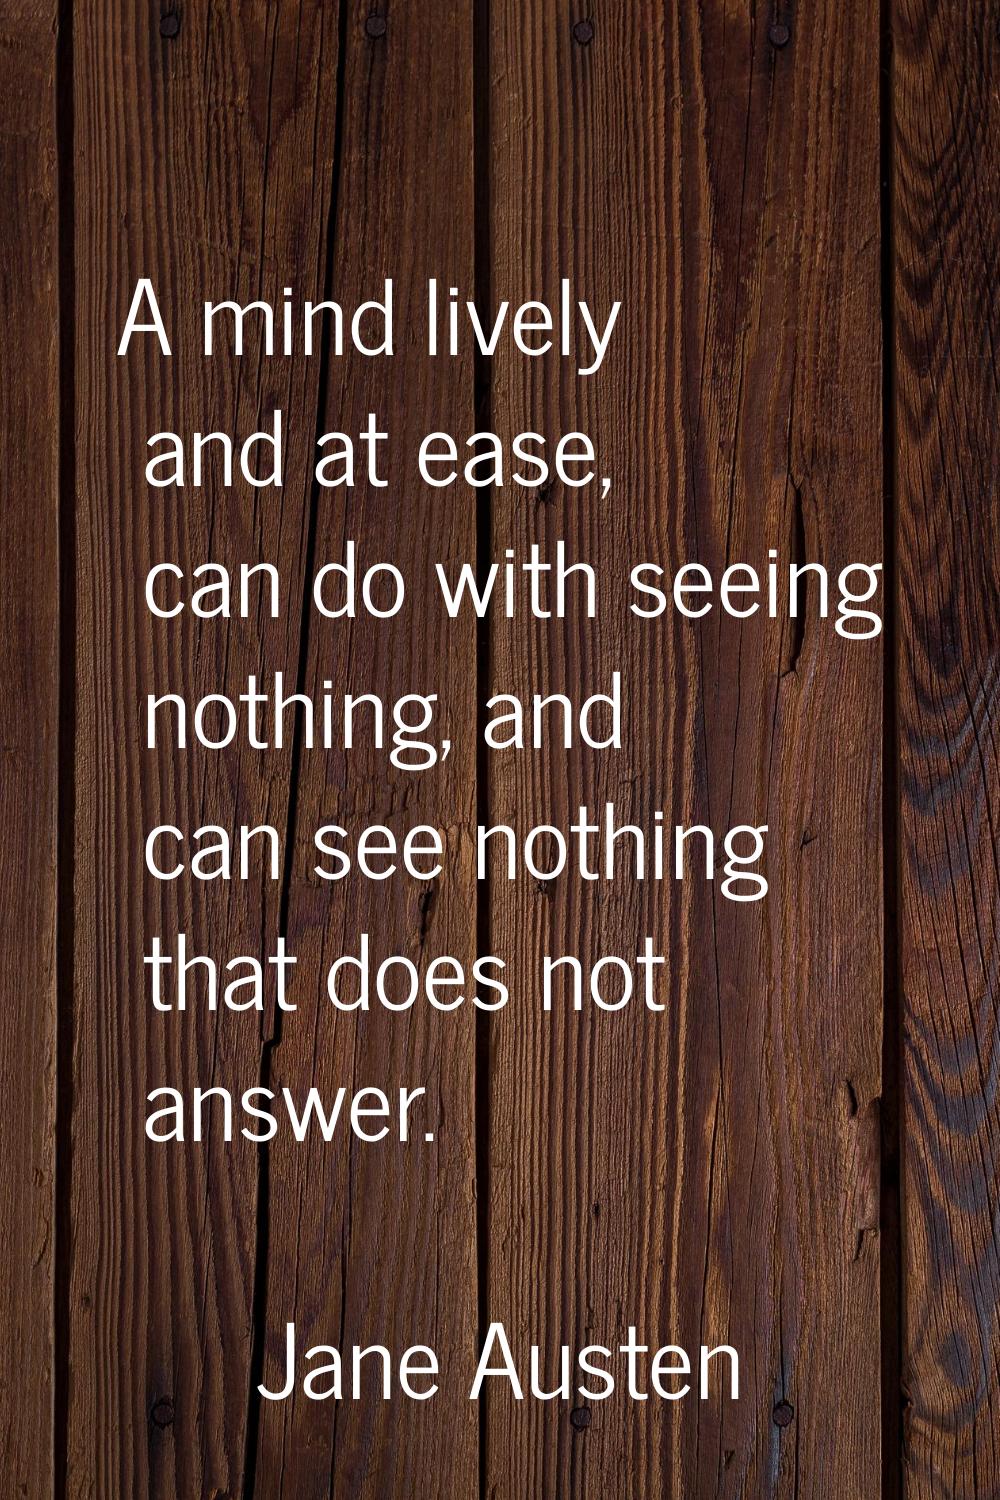 A mind lively and at ease, can do with seeing nothing, and can see nothing that does not answer.